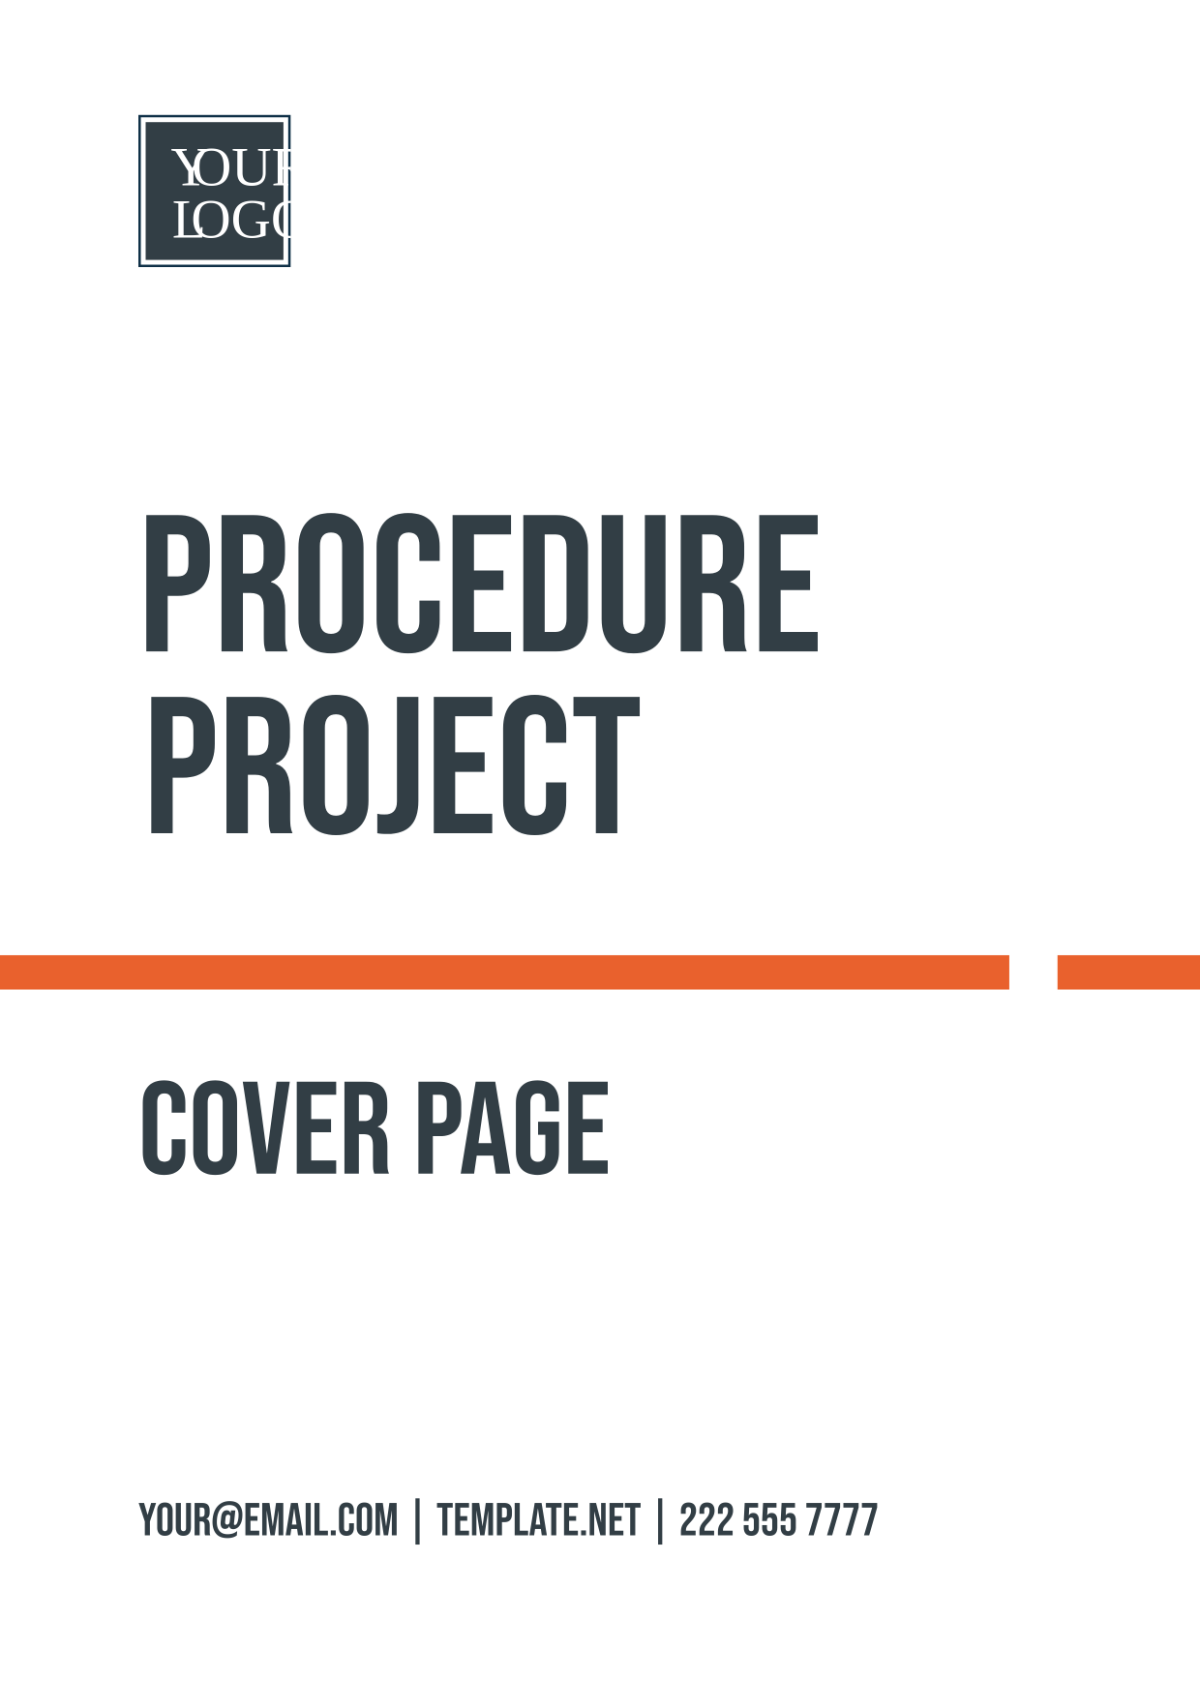 Procedure Project Cover Page Template